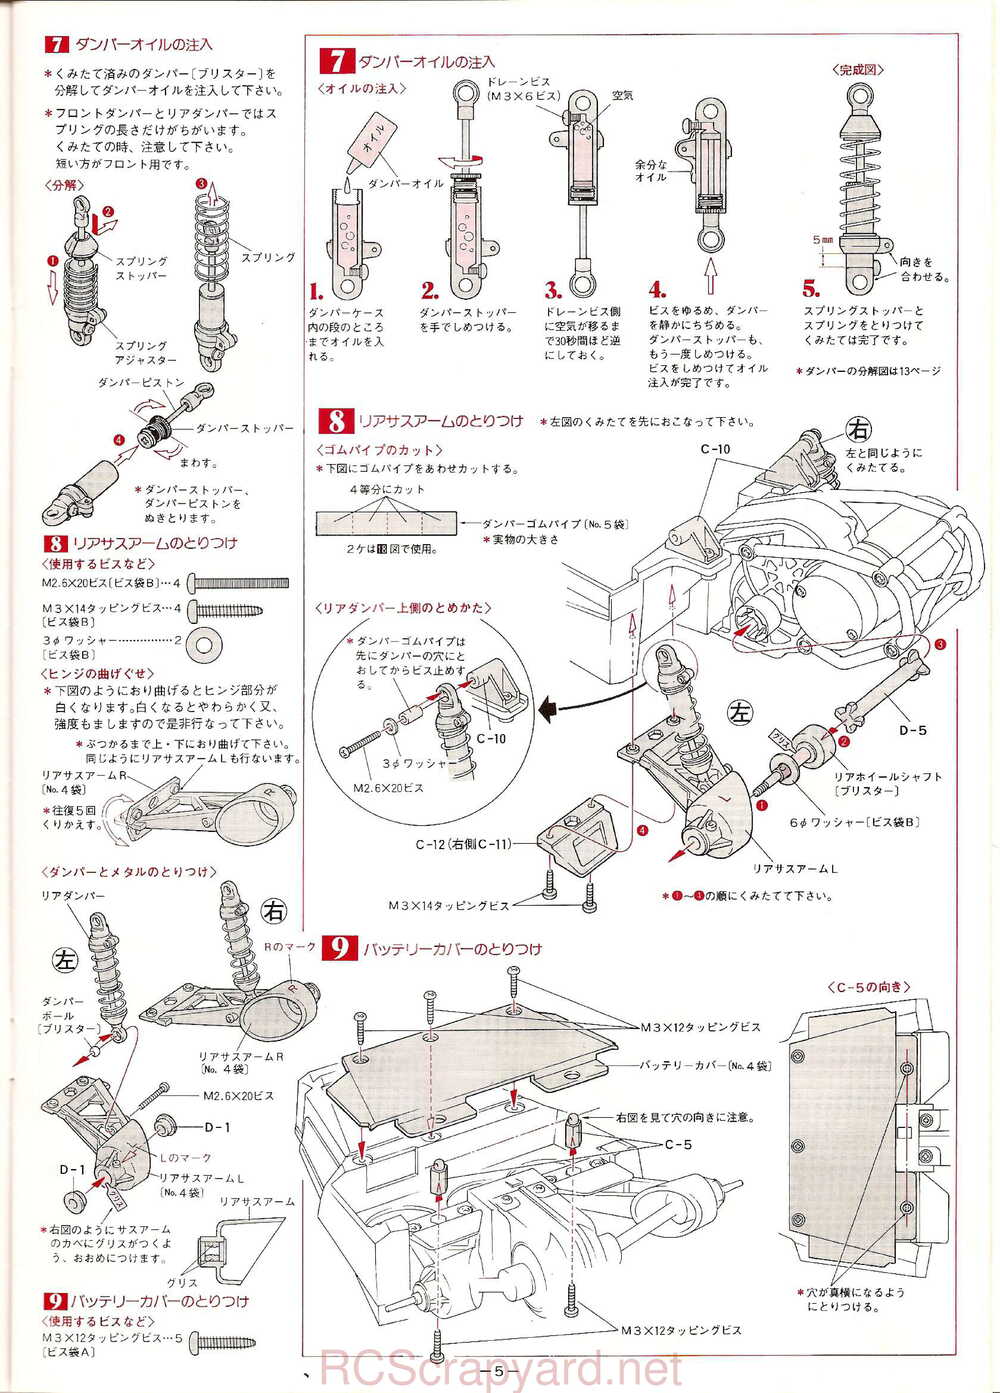 Kyosho - 3084 - Cosmo - Manual - Page 05